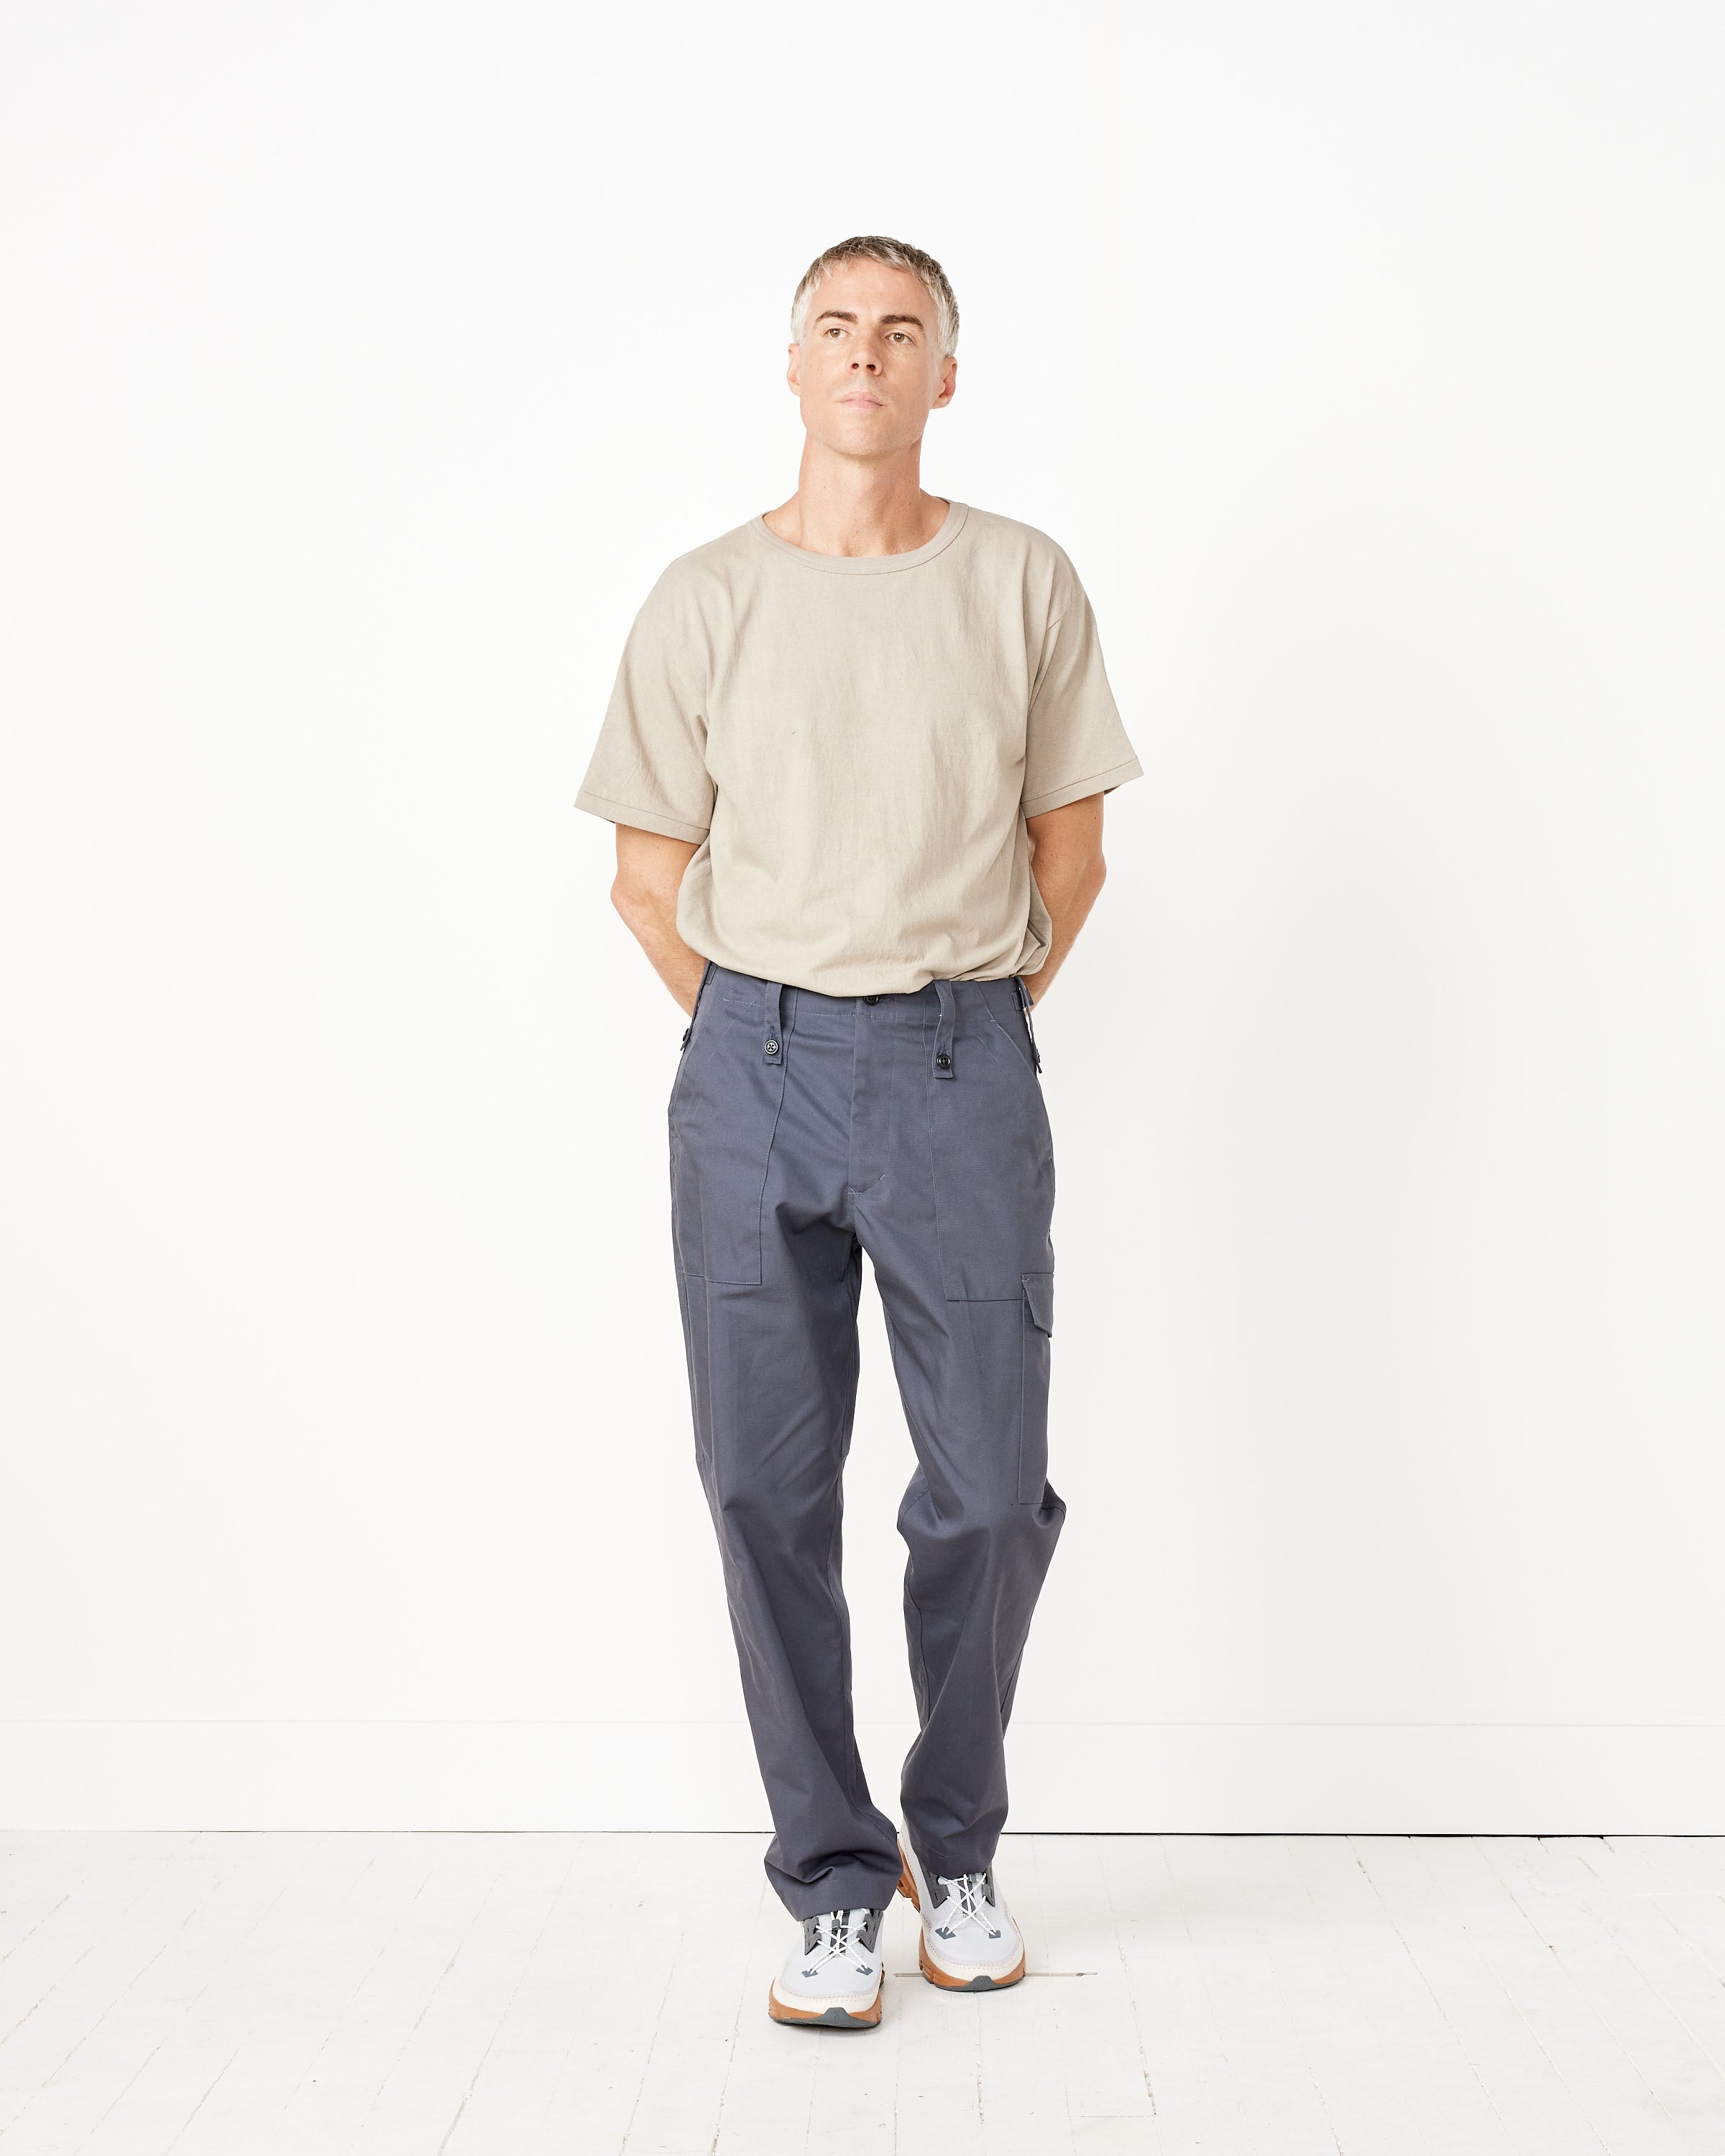 OCR Pant ECO Twill in Charcoal